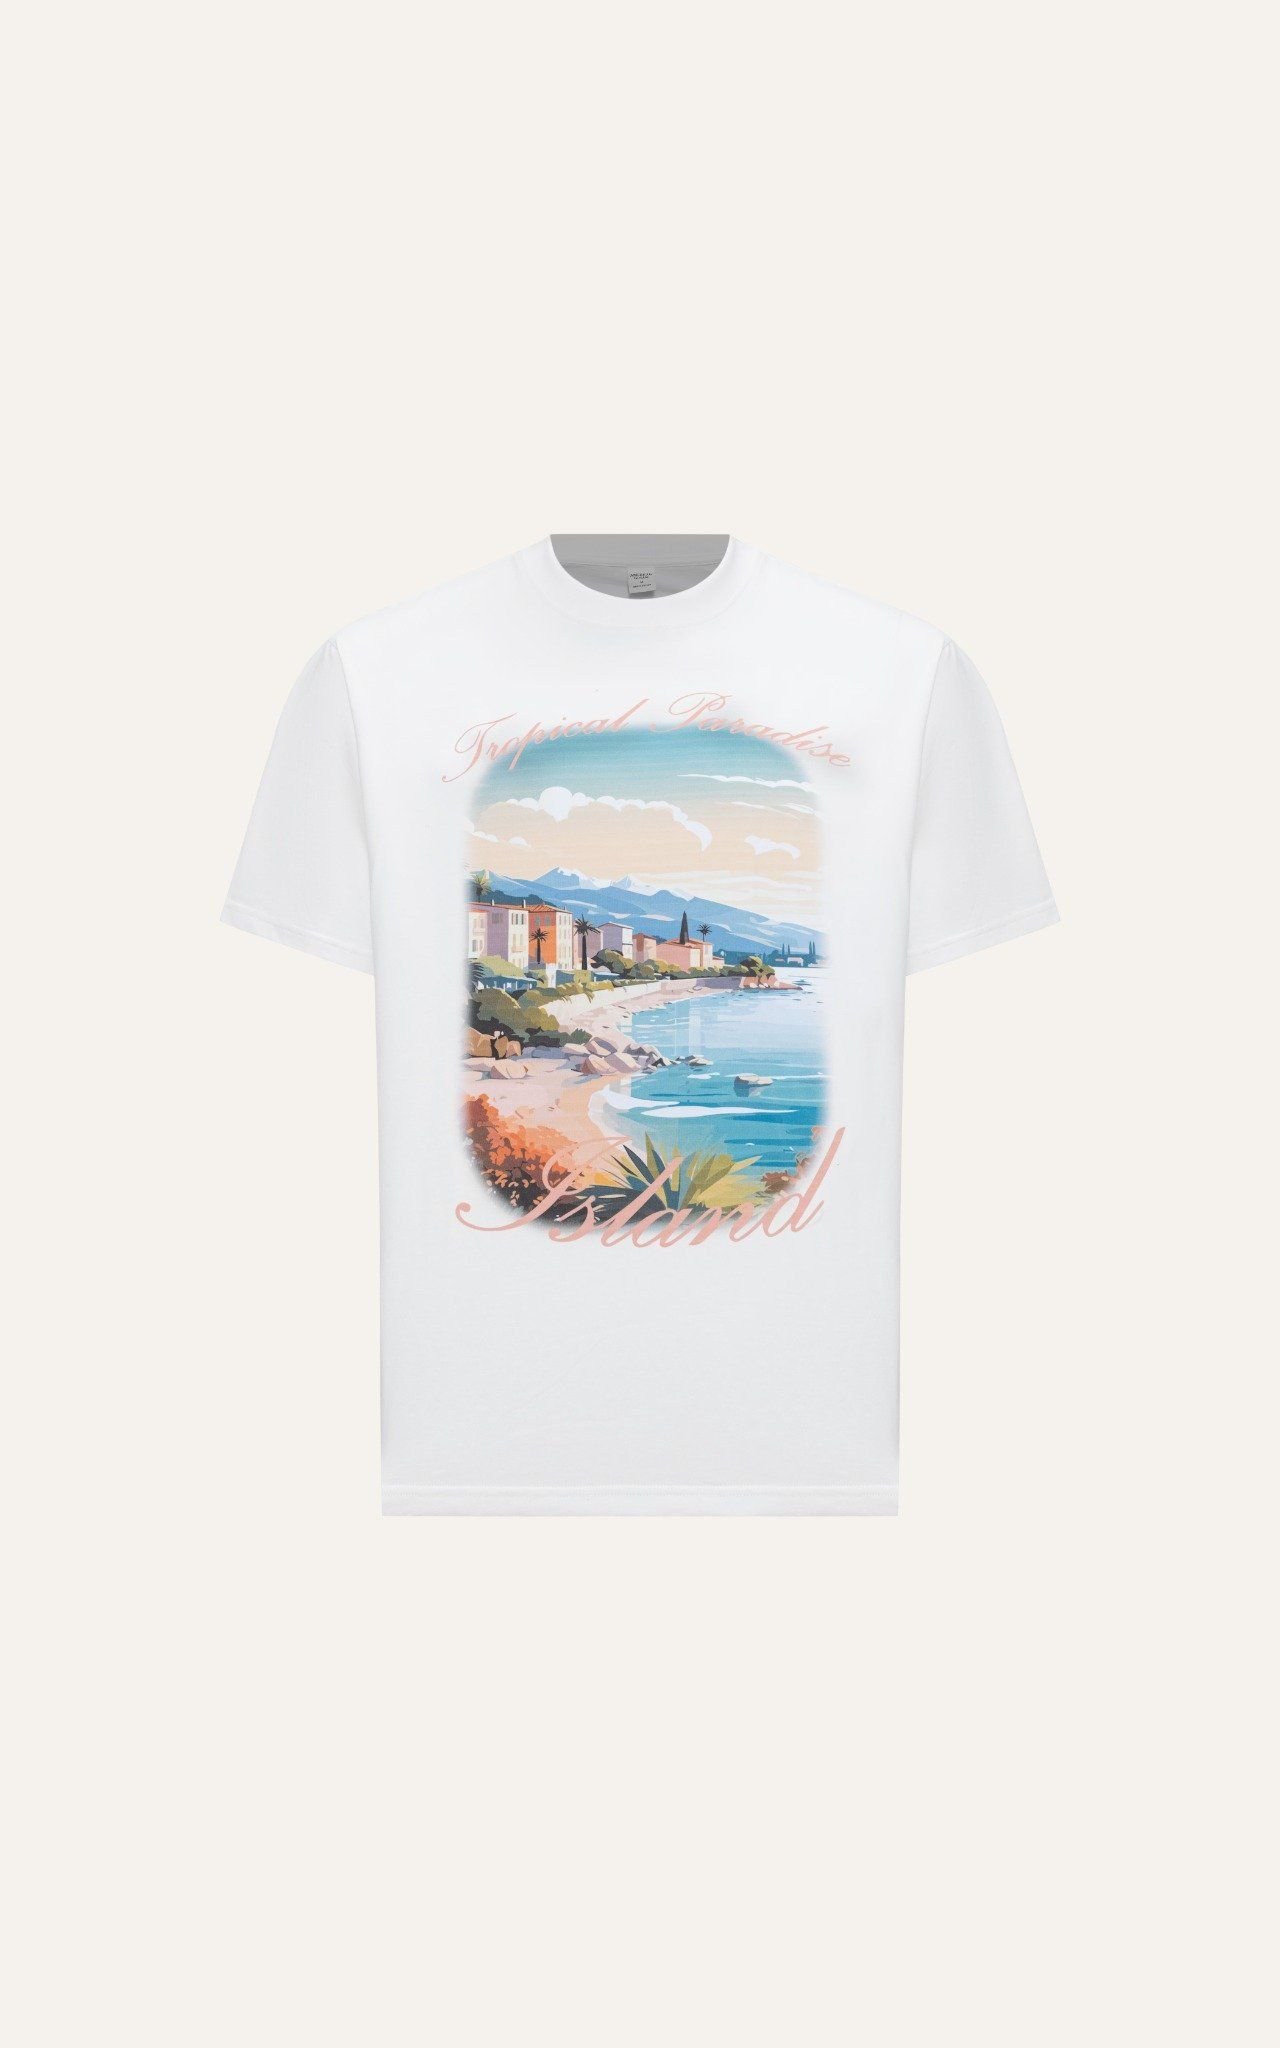  AG695 FACTORY OVERSIZE NEW PRINTED "TROPICAL PARADISE" T-SHIRT - WHITE 